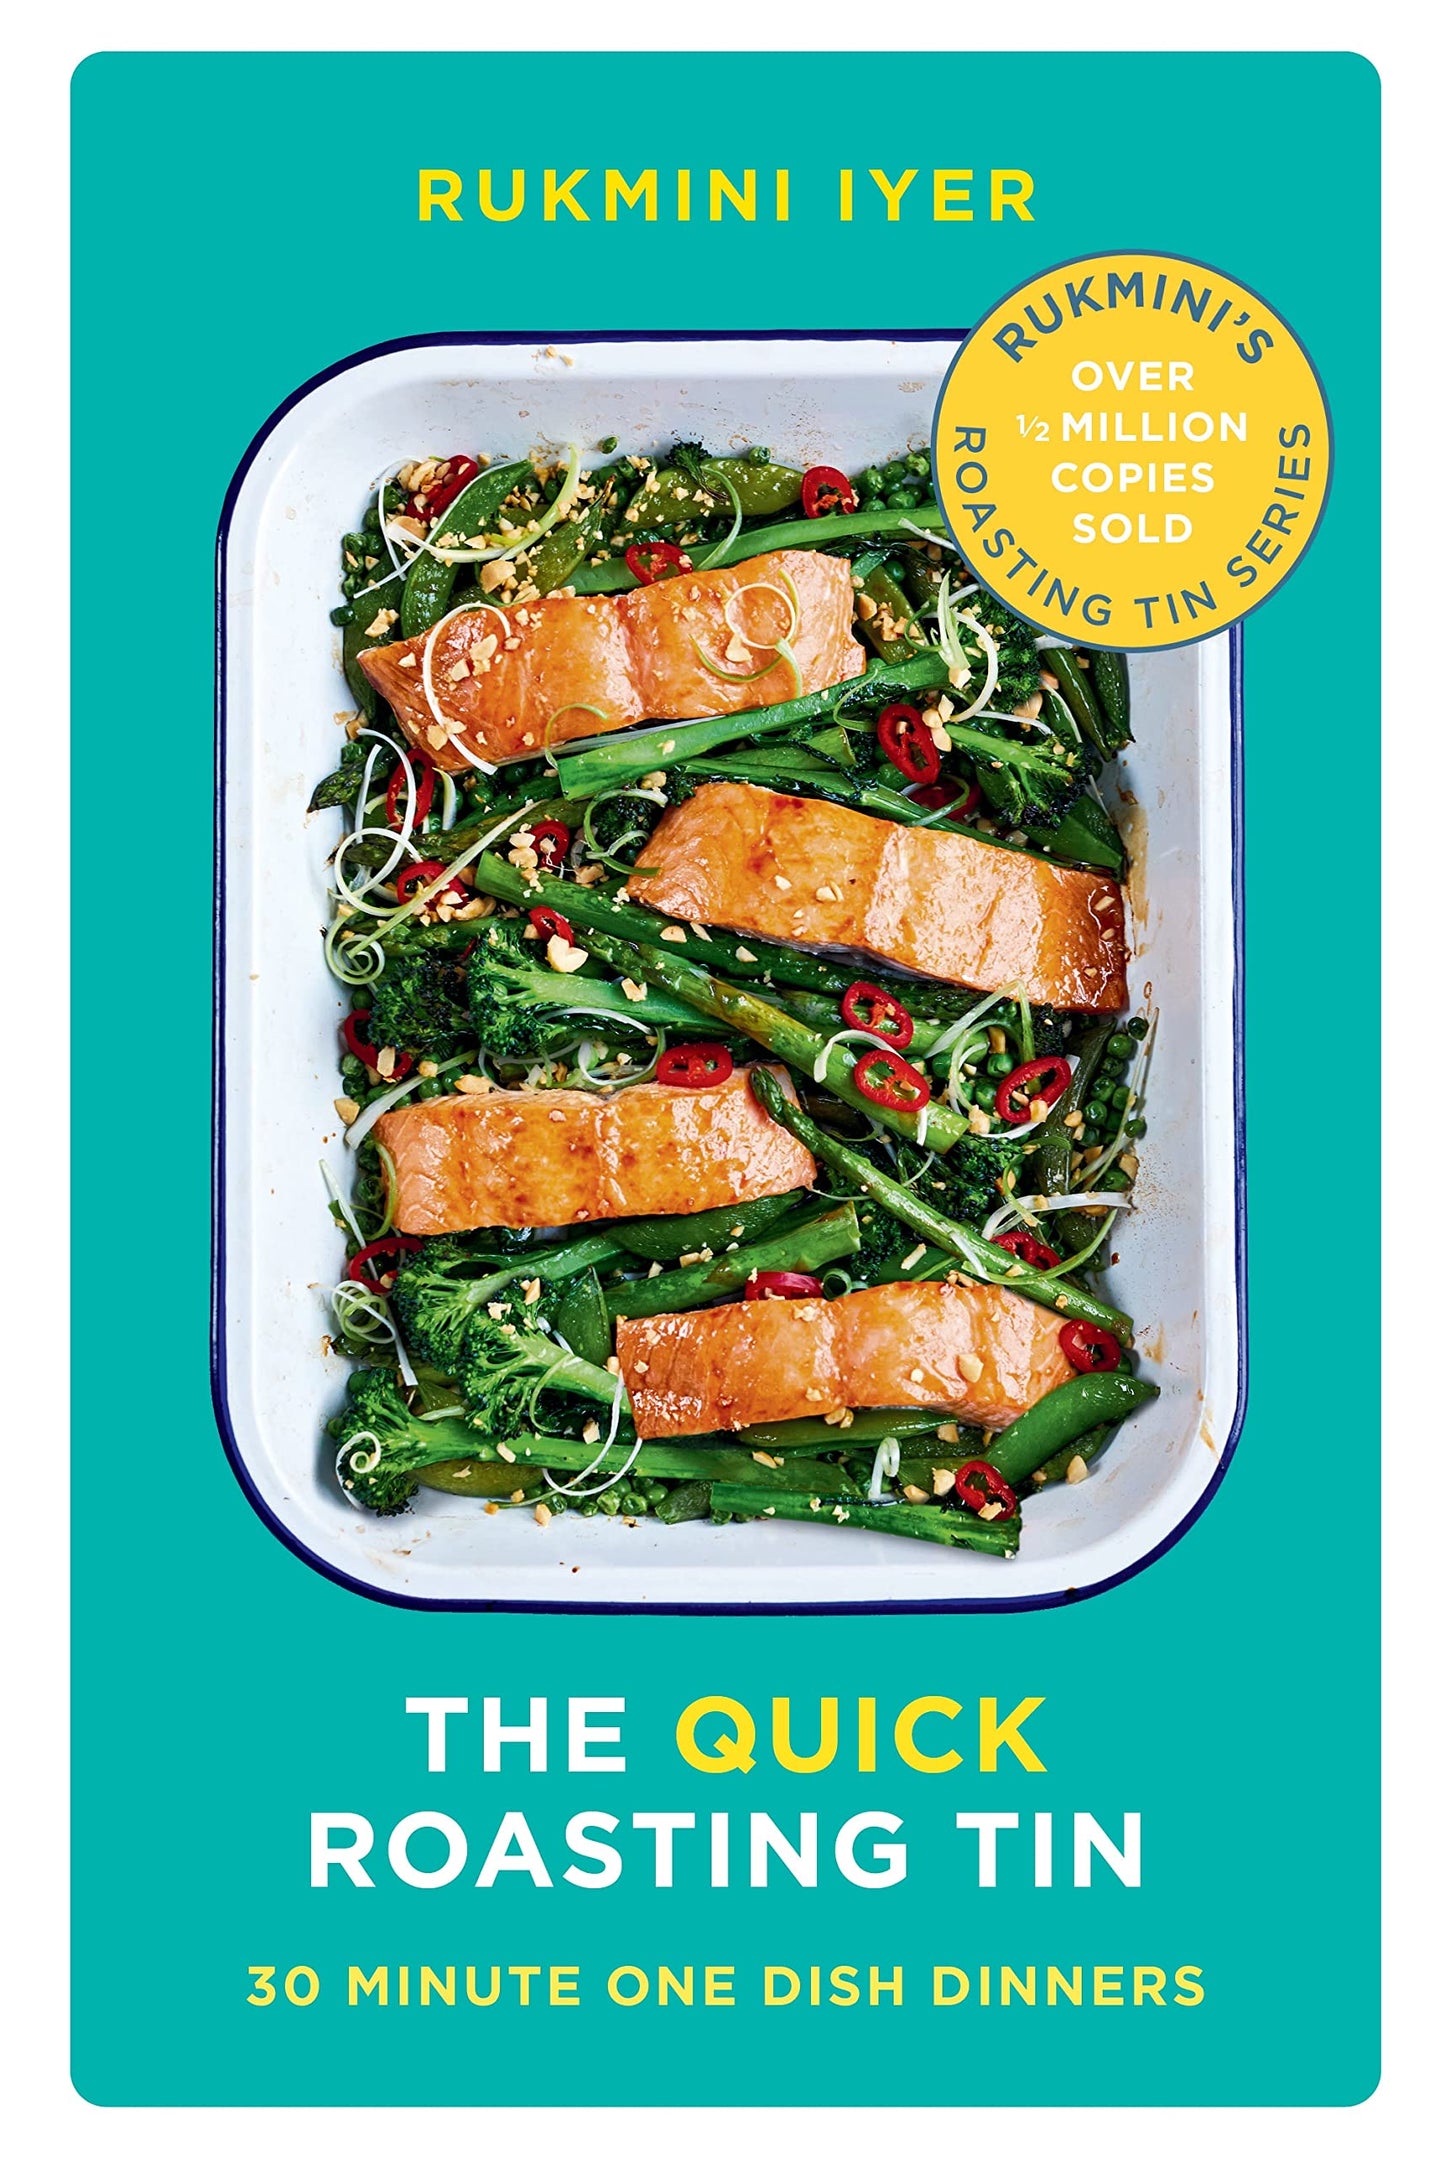 The Quick Roasting Tin: 30 Minute One Dish Dinners Recipe Book